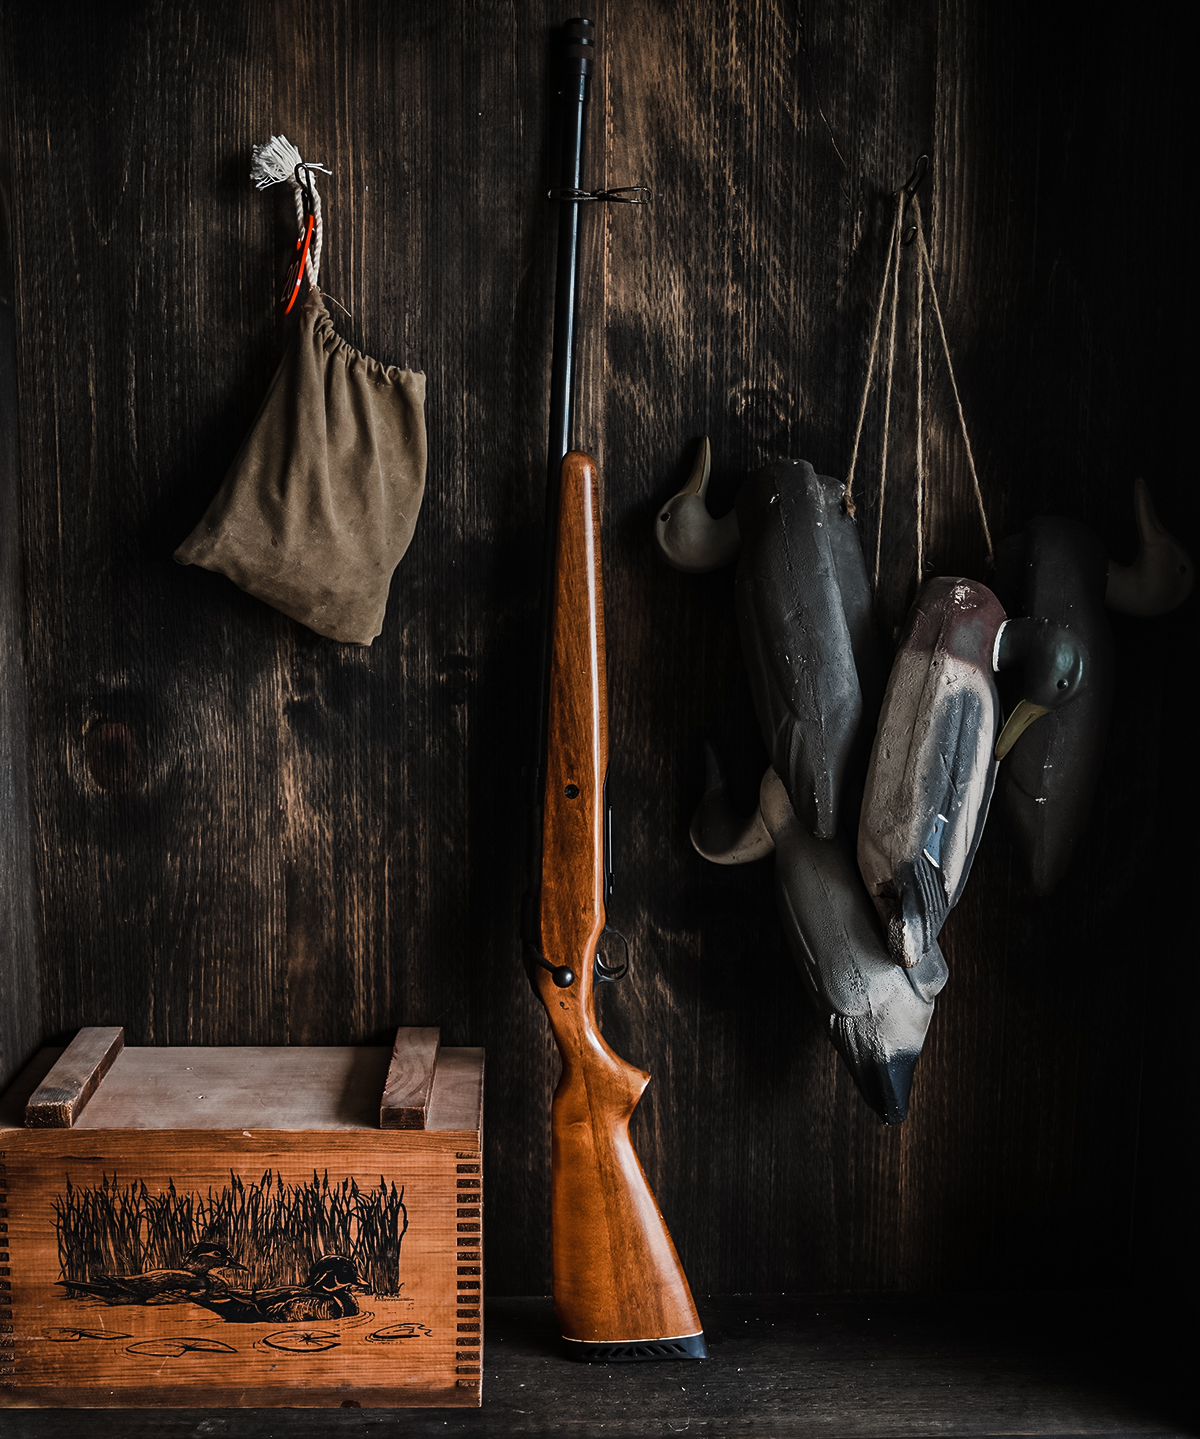 The Bolt Action Shotgun: An American Classic That's Almost Dead